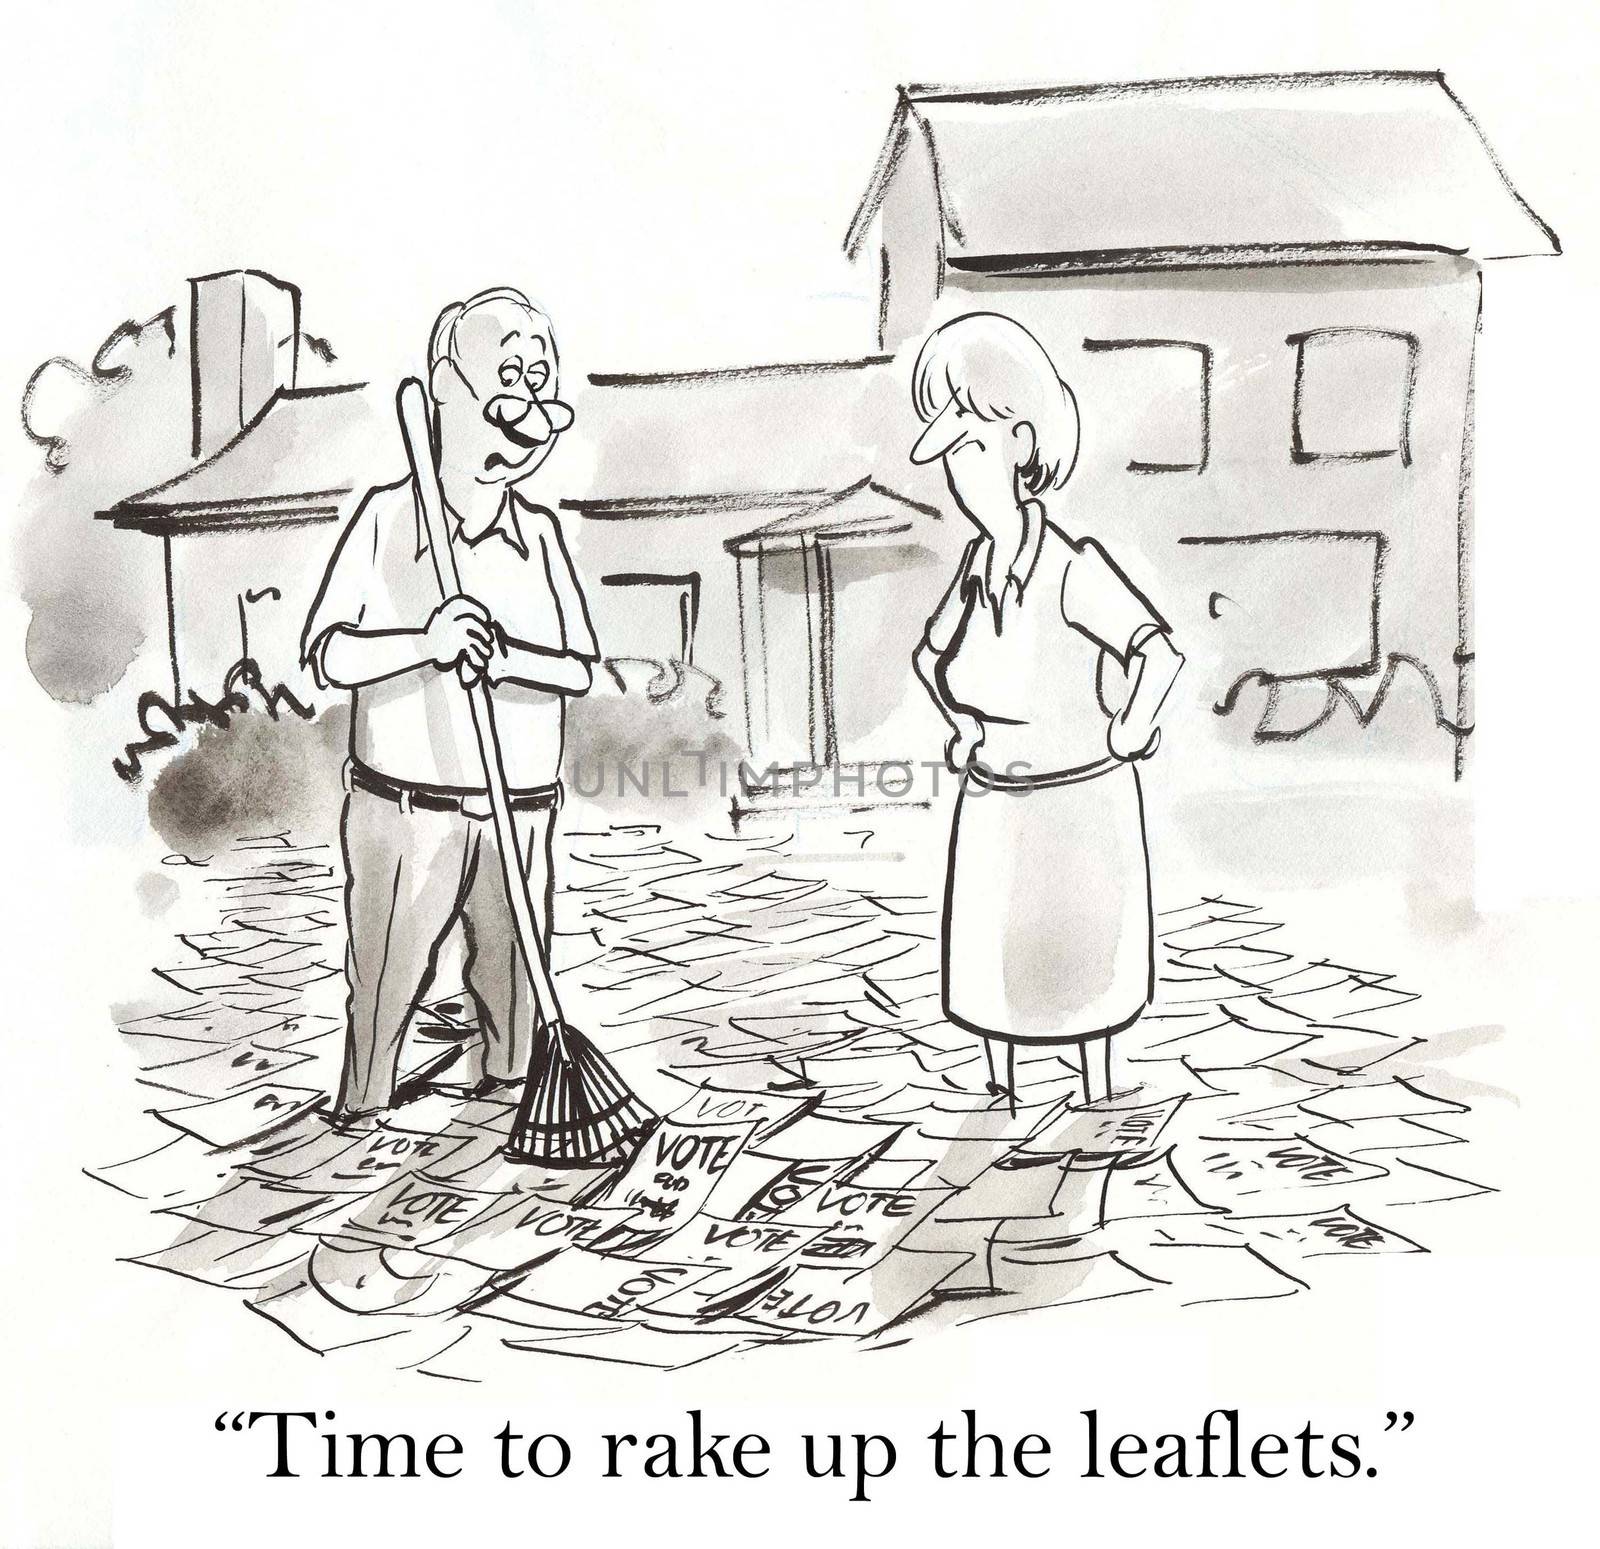 "Time to rake up the leaflets."